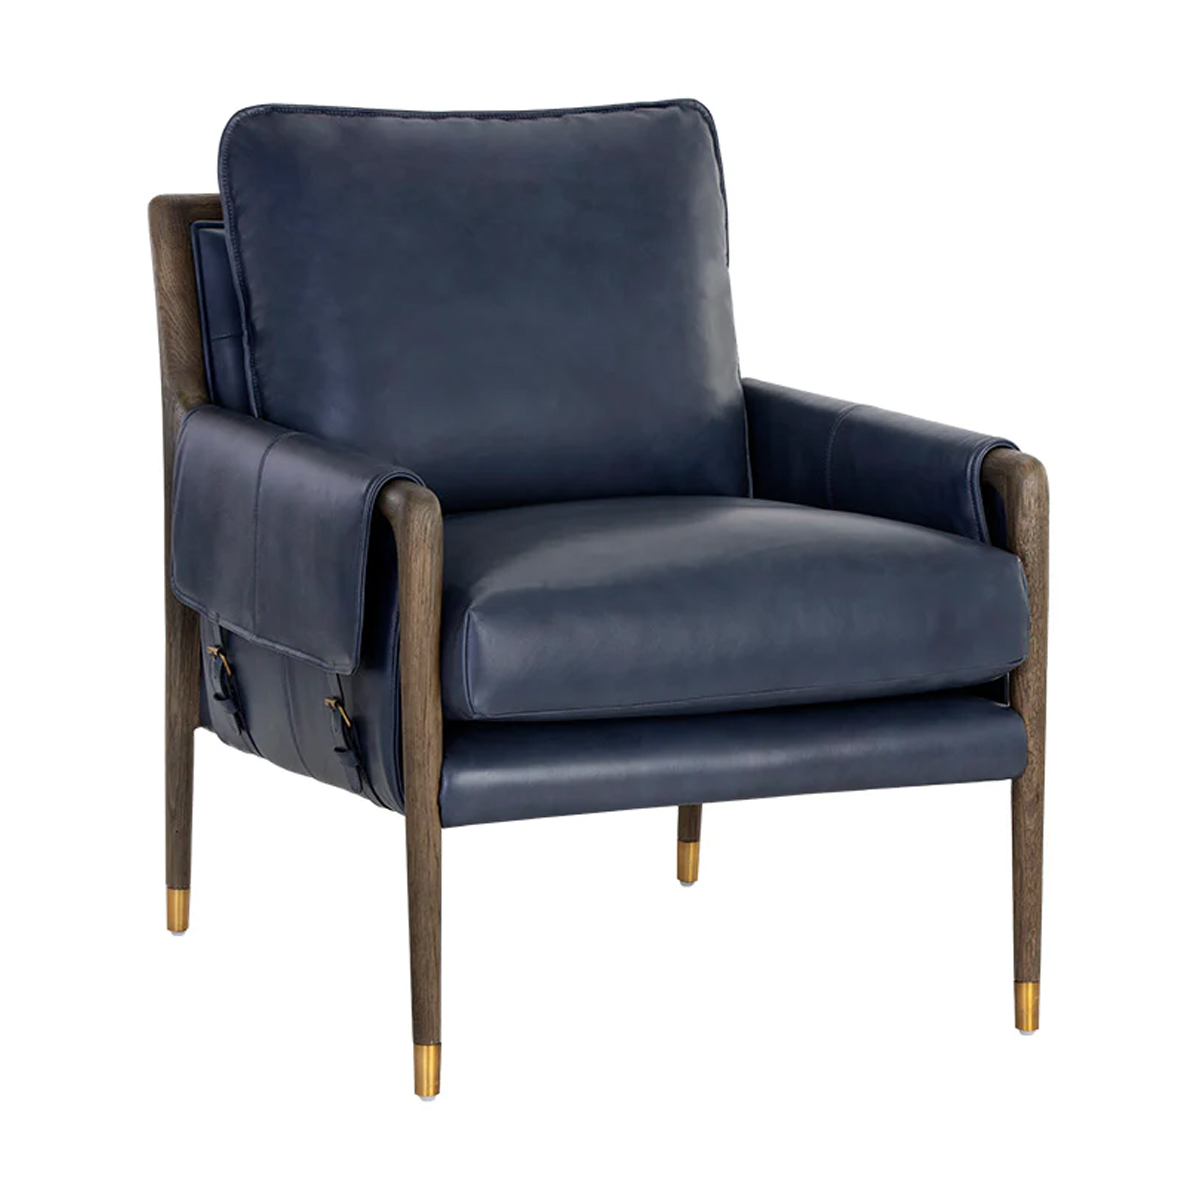 Maxine Navy Leather Chair - Liv Design Collective